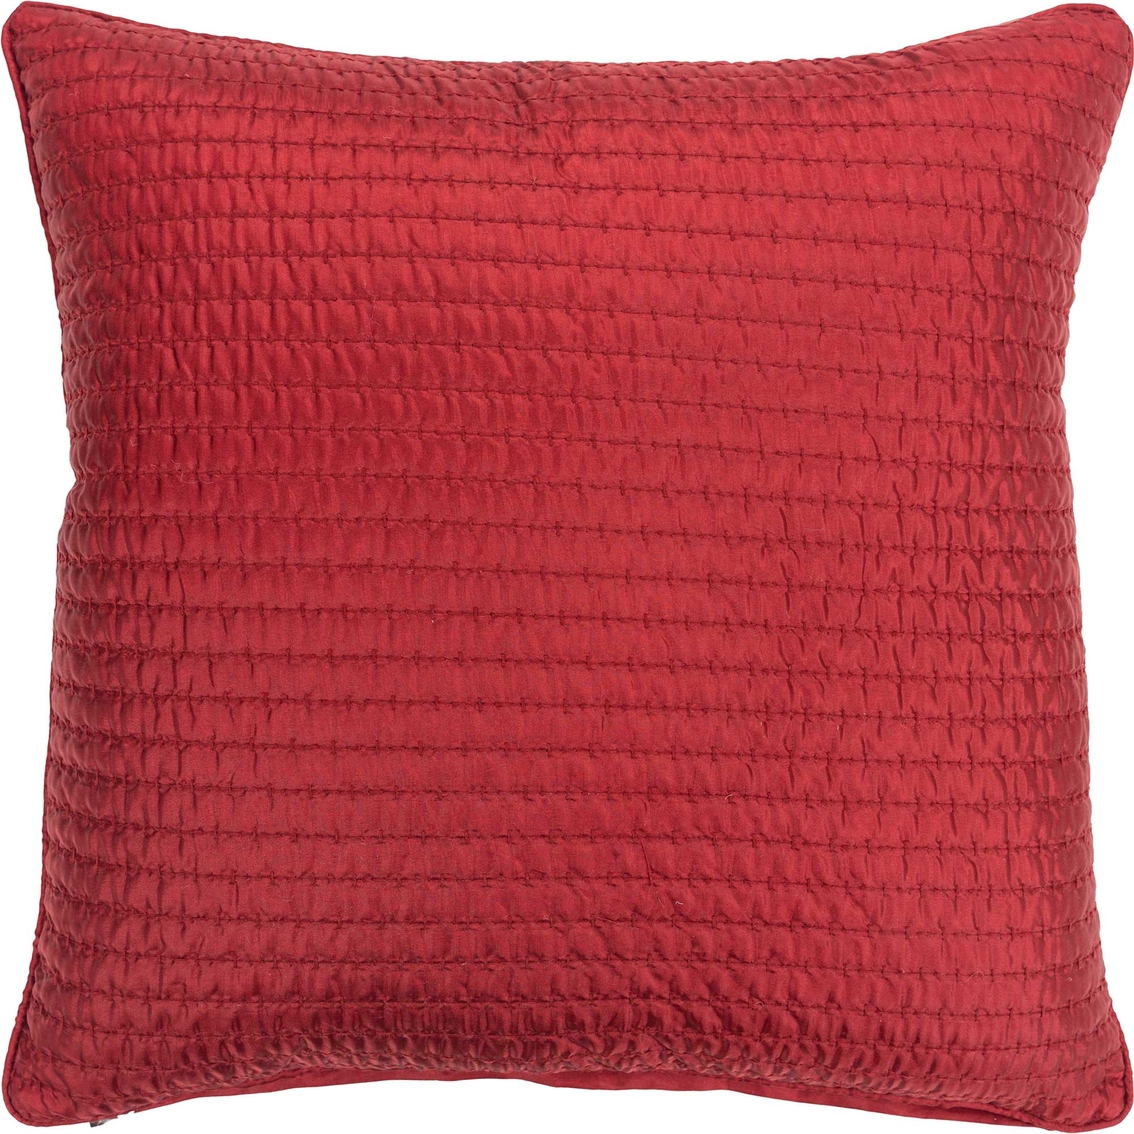 Rizzy Home Solid Deep Red Polyester Filled Pillow - Image 1 of 5